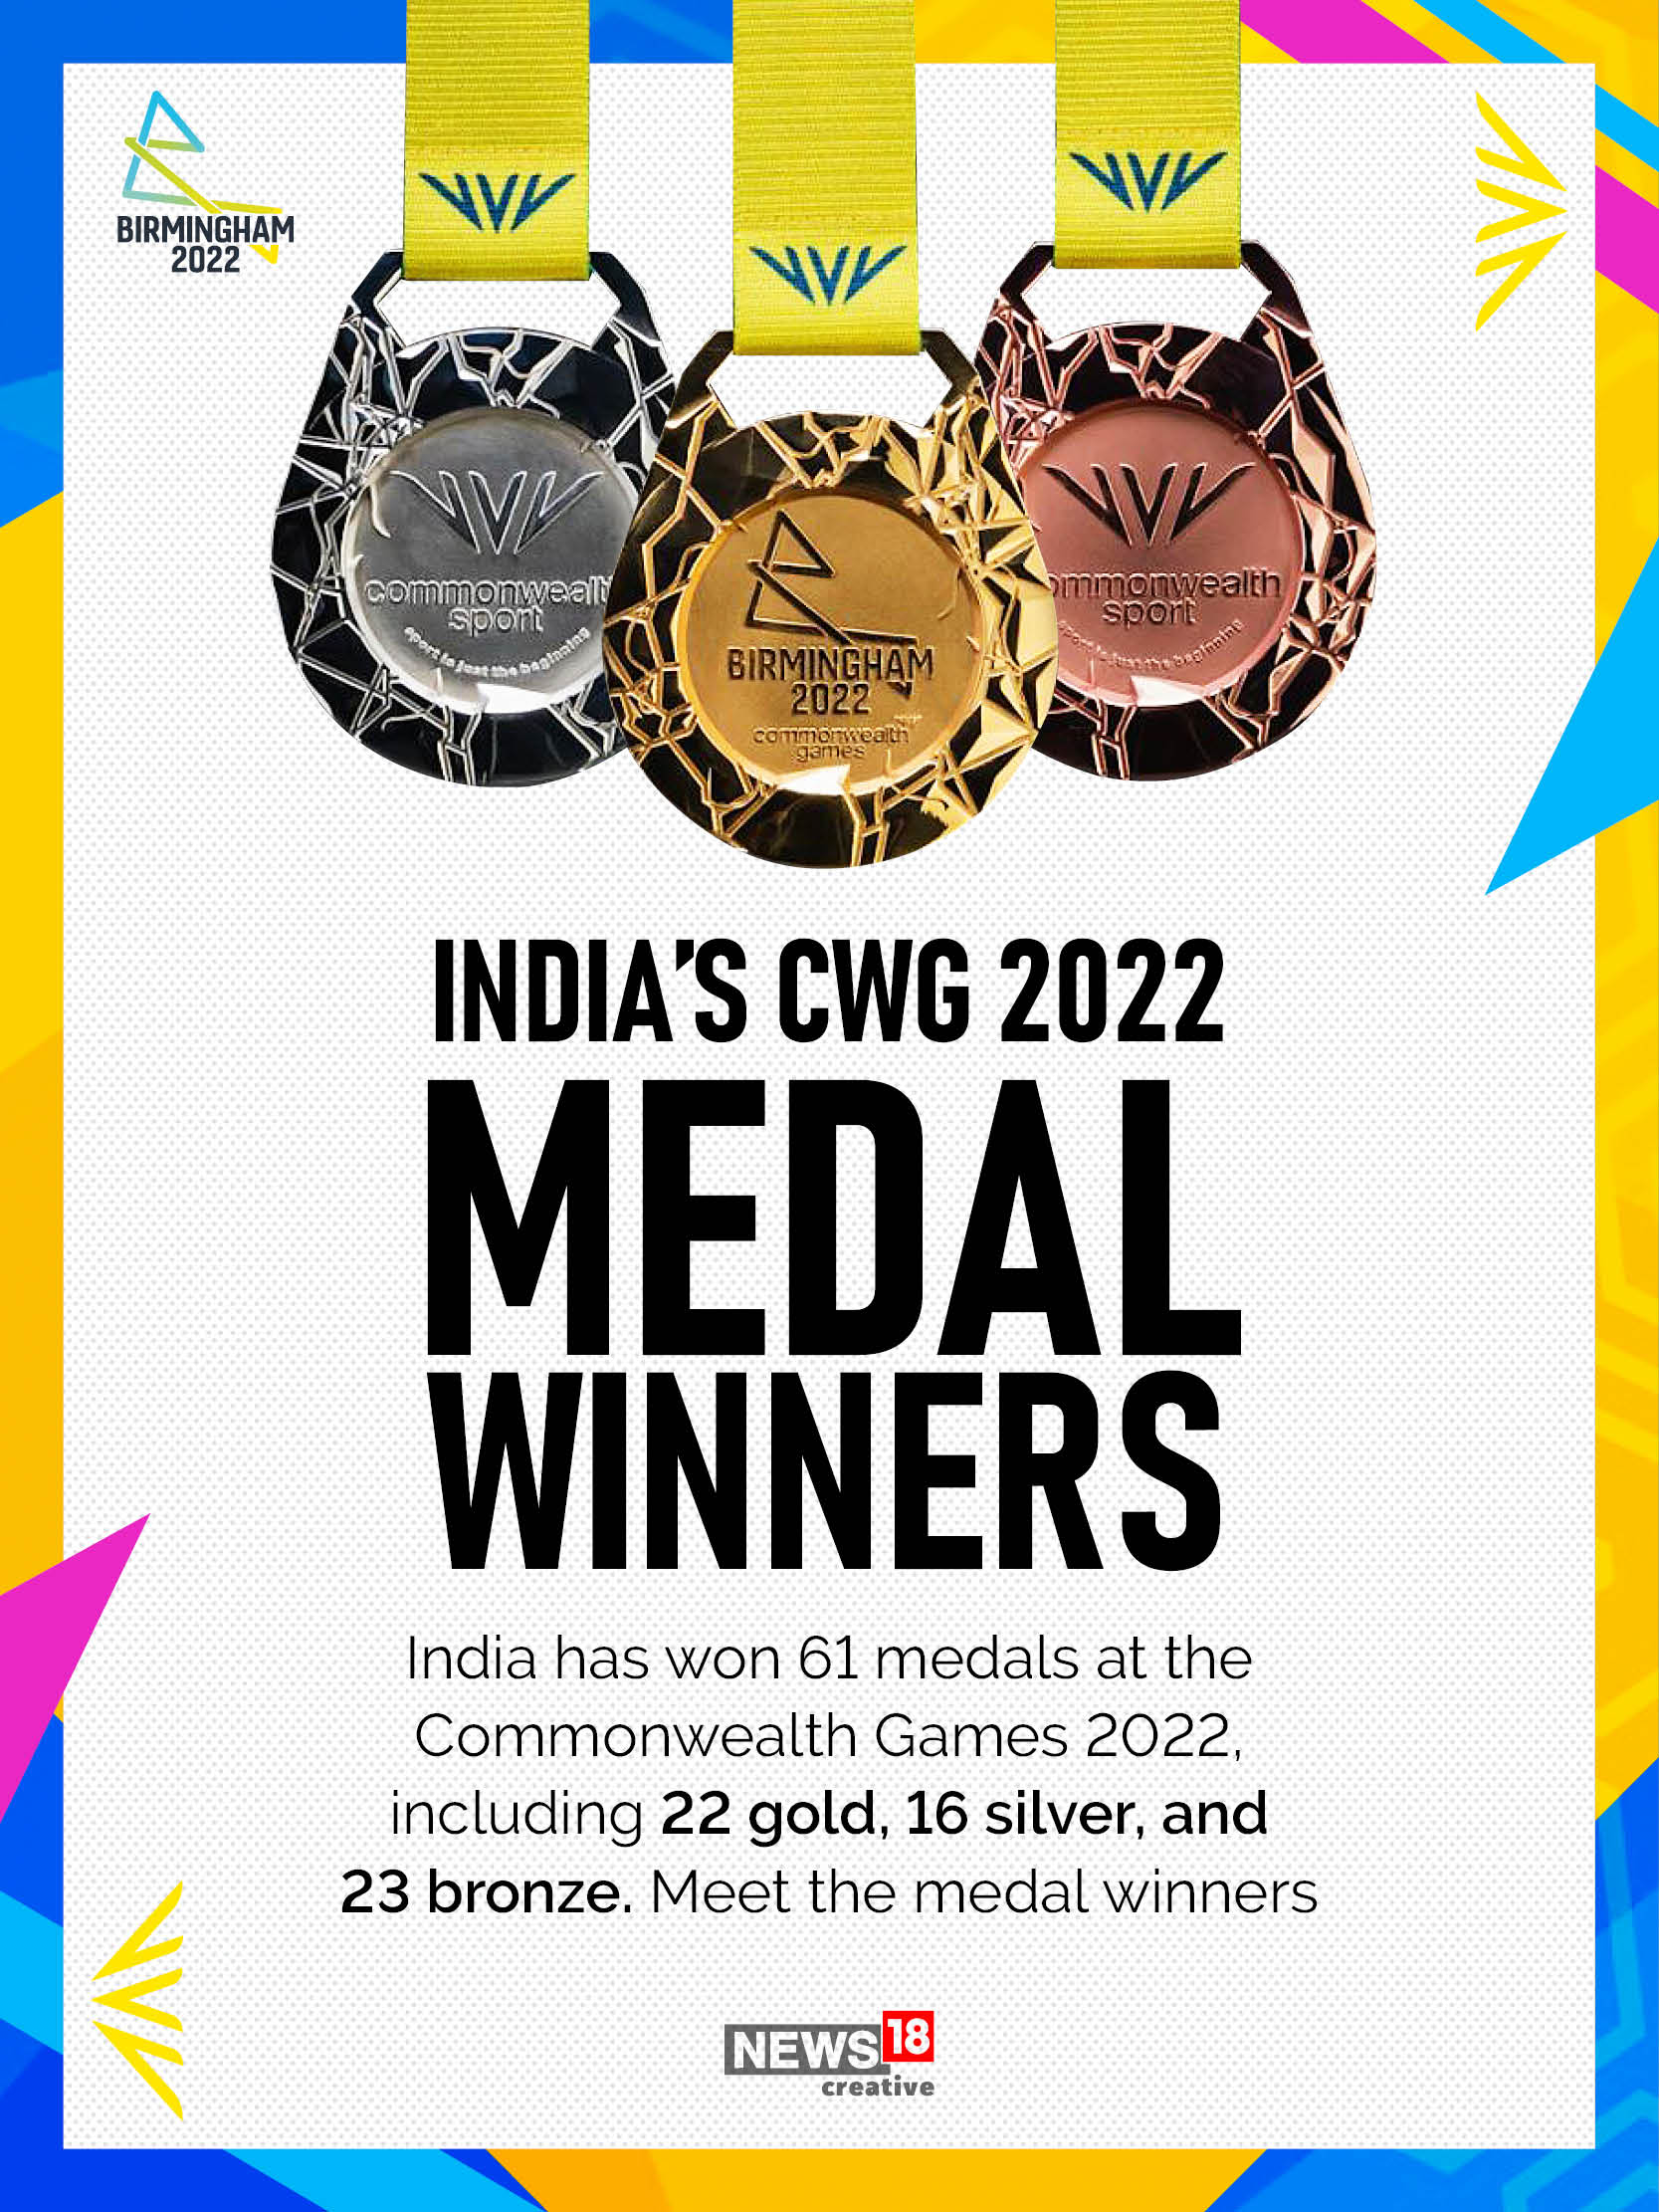 CWG 2022 All The Gold Medal Winners at The Birmingham Commonwealth